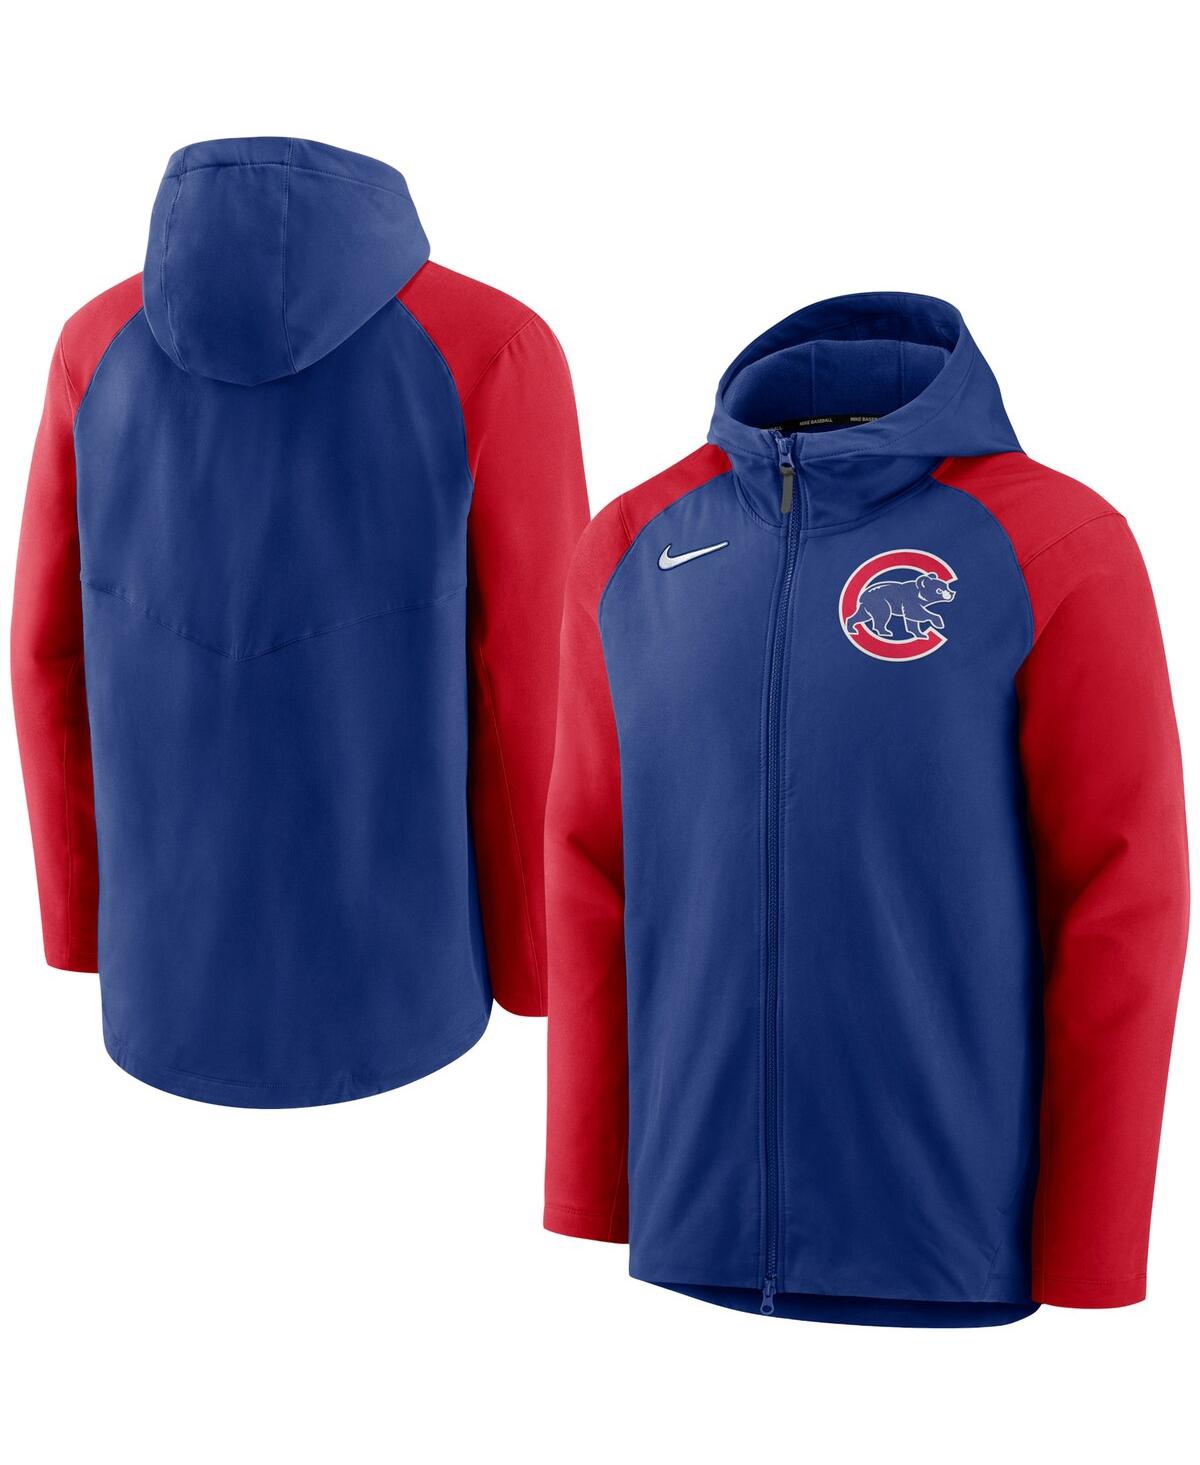 NIKE MEN'S NIKE ROYAL, RED CHICAGO CUBS AUTHENTIC COLLECTION PERFORMANCE RAGLAN FULL-ZIP HOODIE